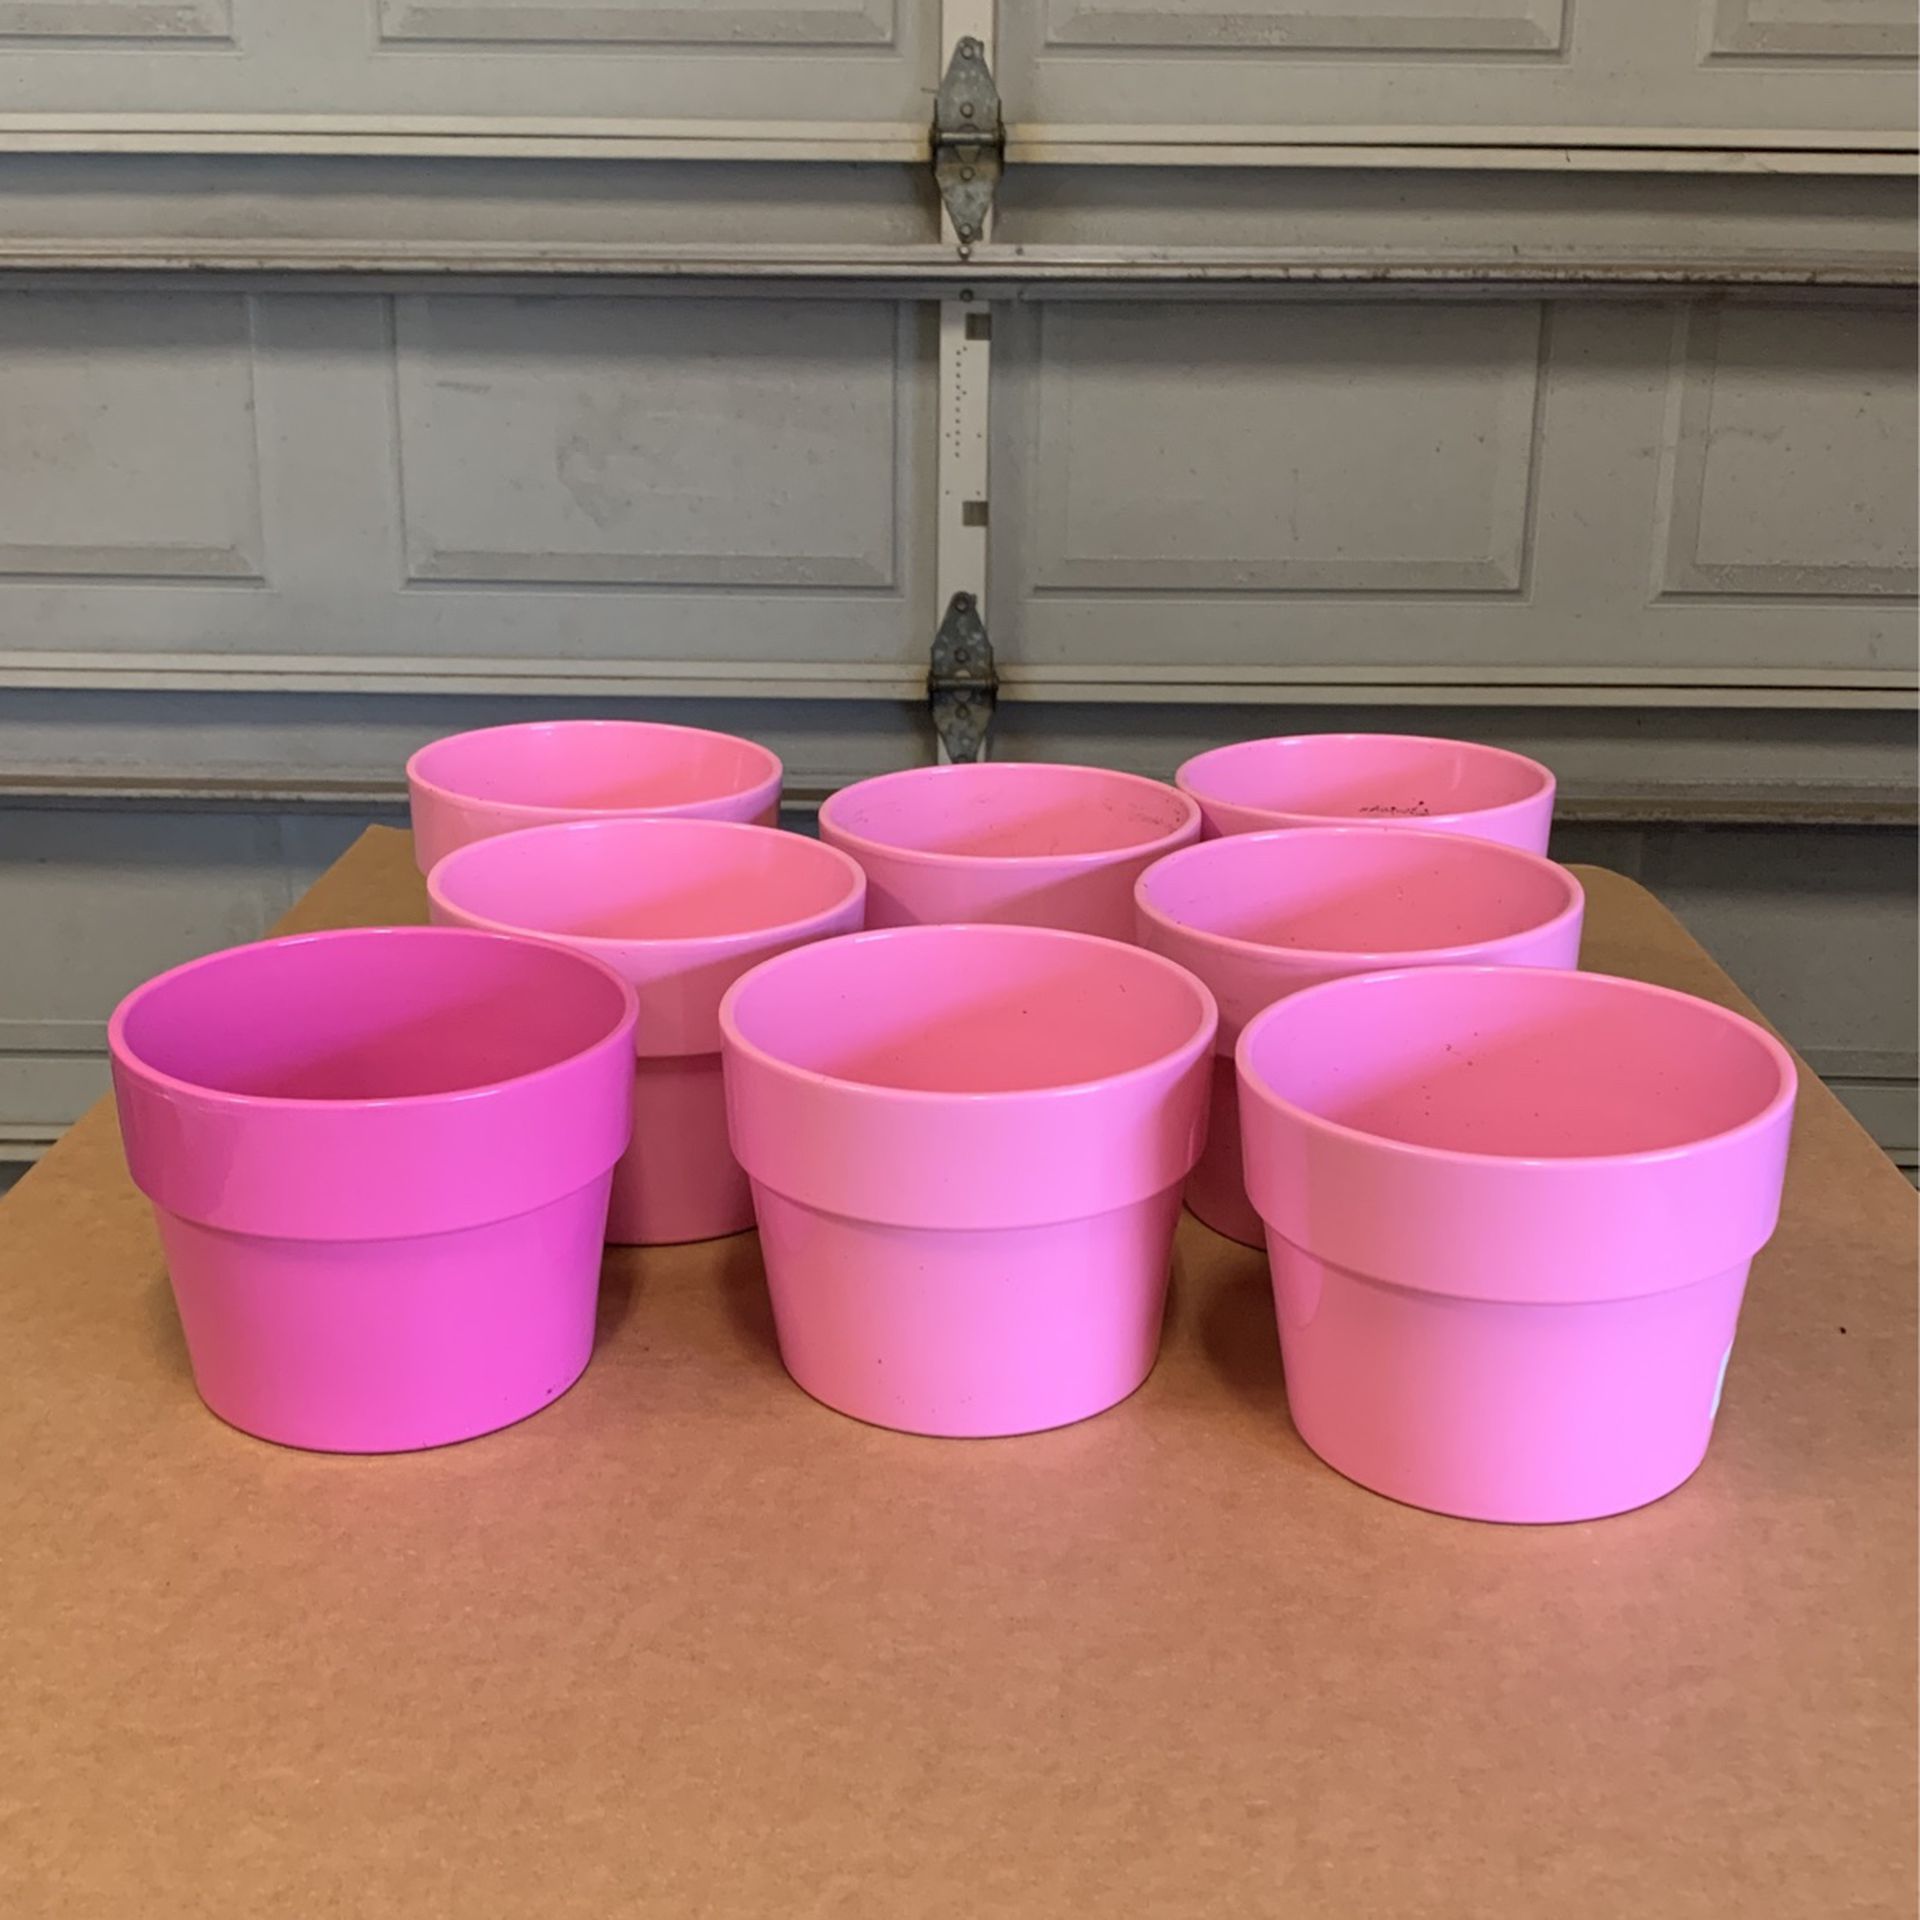 Eight 6” Wide Pink Ceramic Pots